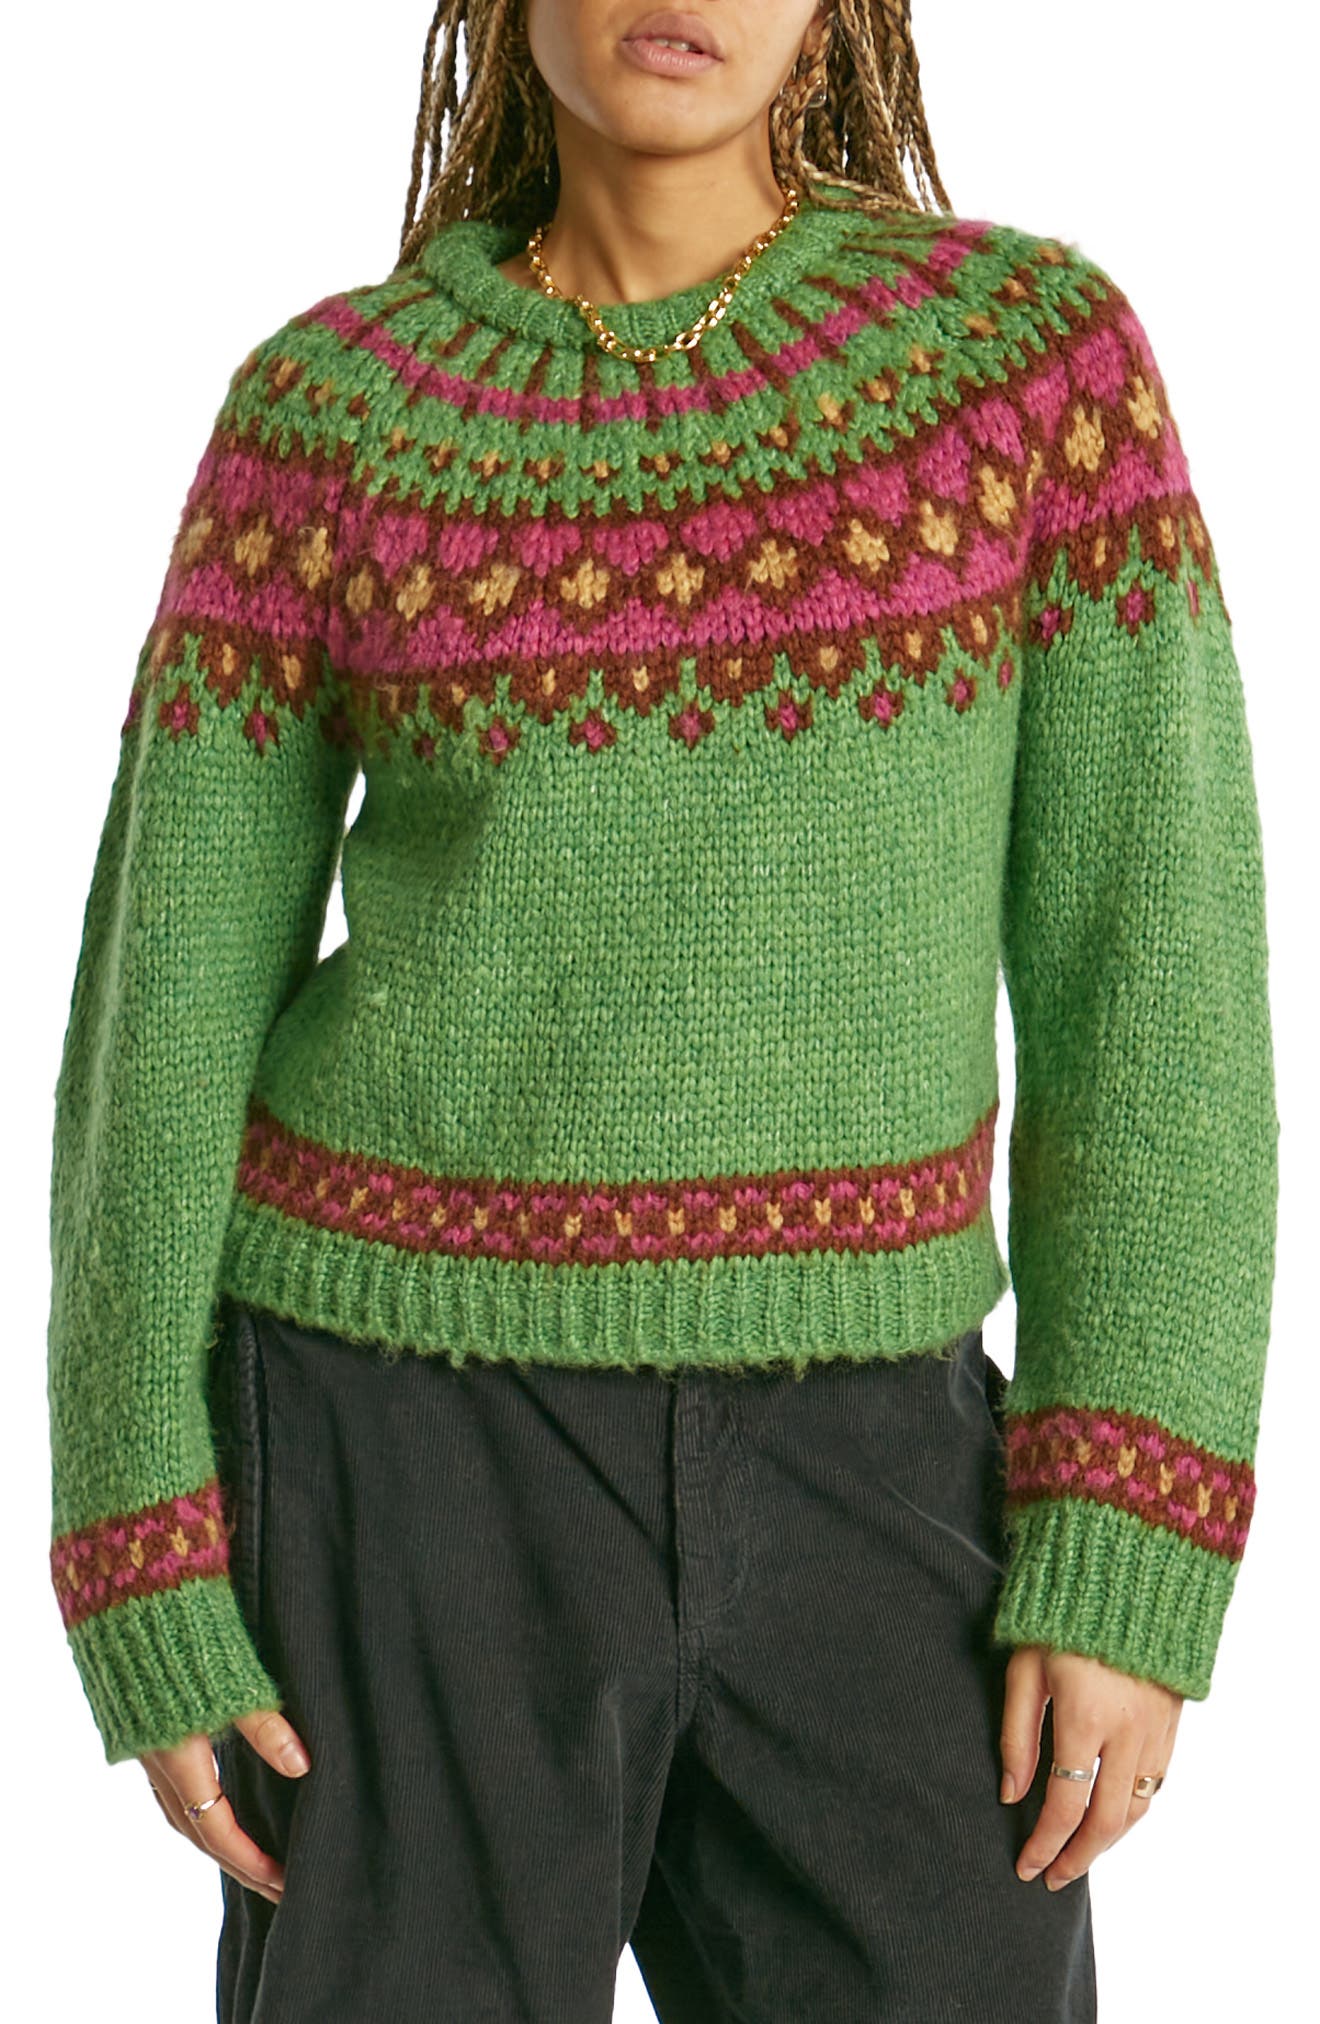 60s 70s Style Sweaters, Cardigans & Jumpers BDG Urban Outfitters Fair Isle Chunky Sweater in Green at Nordstrom Rack Size Small $39.97 AT vintagedancer.com